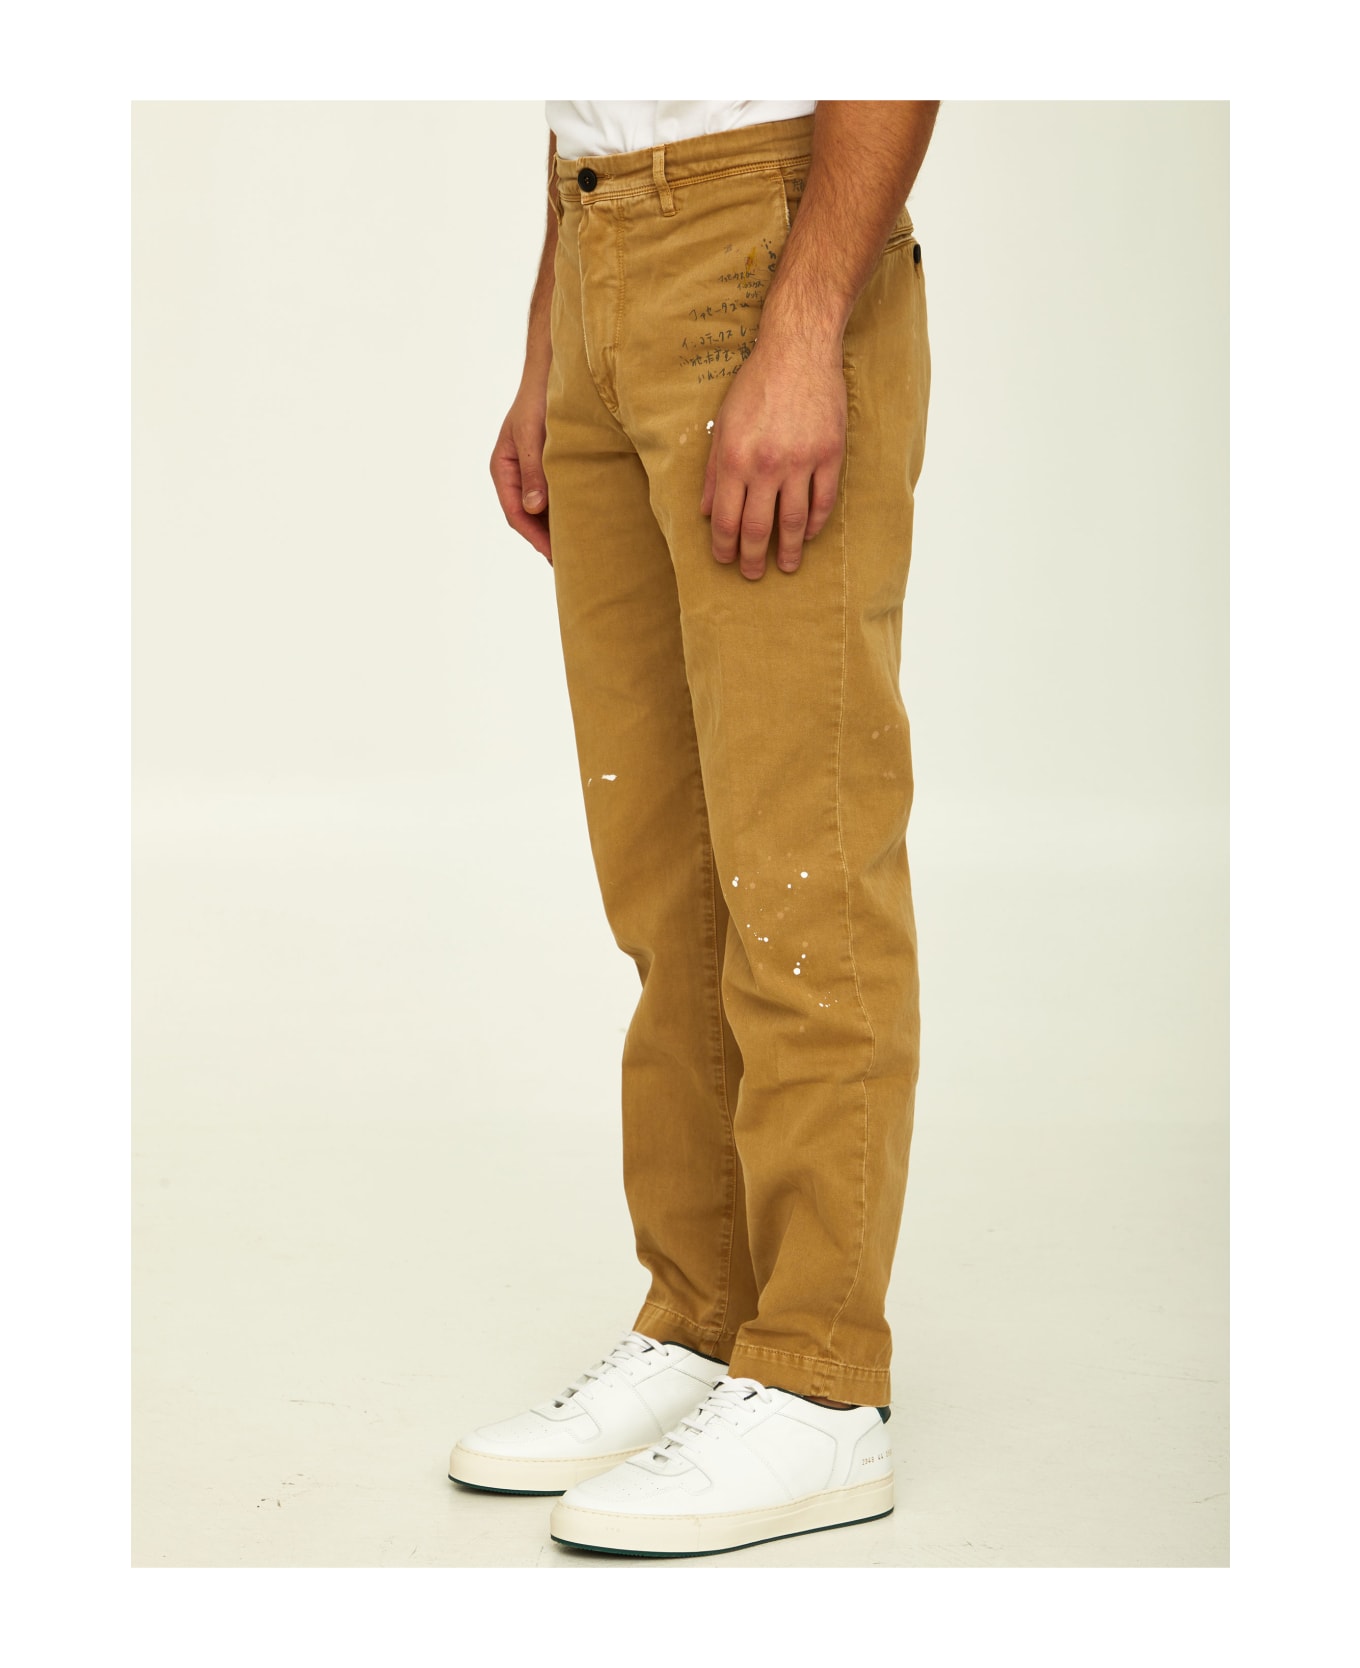 Incotex Red Camel Cotton Trousers - BEIGE ボトムス